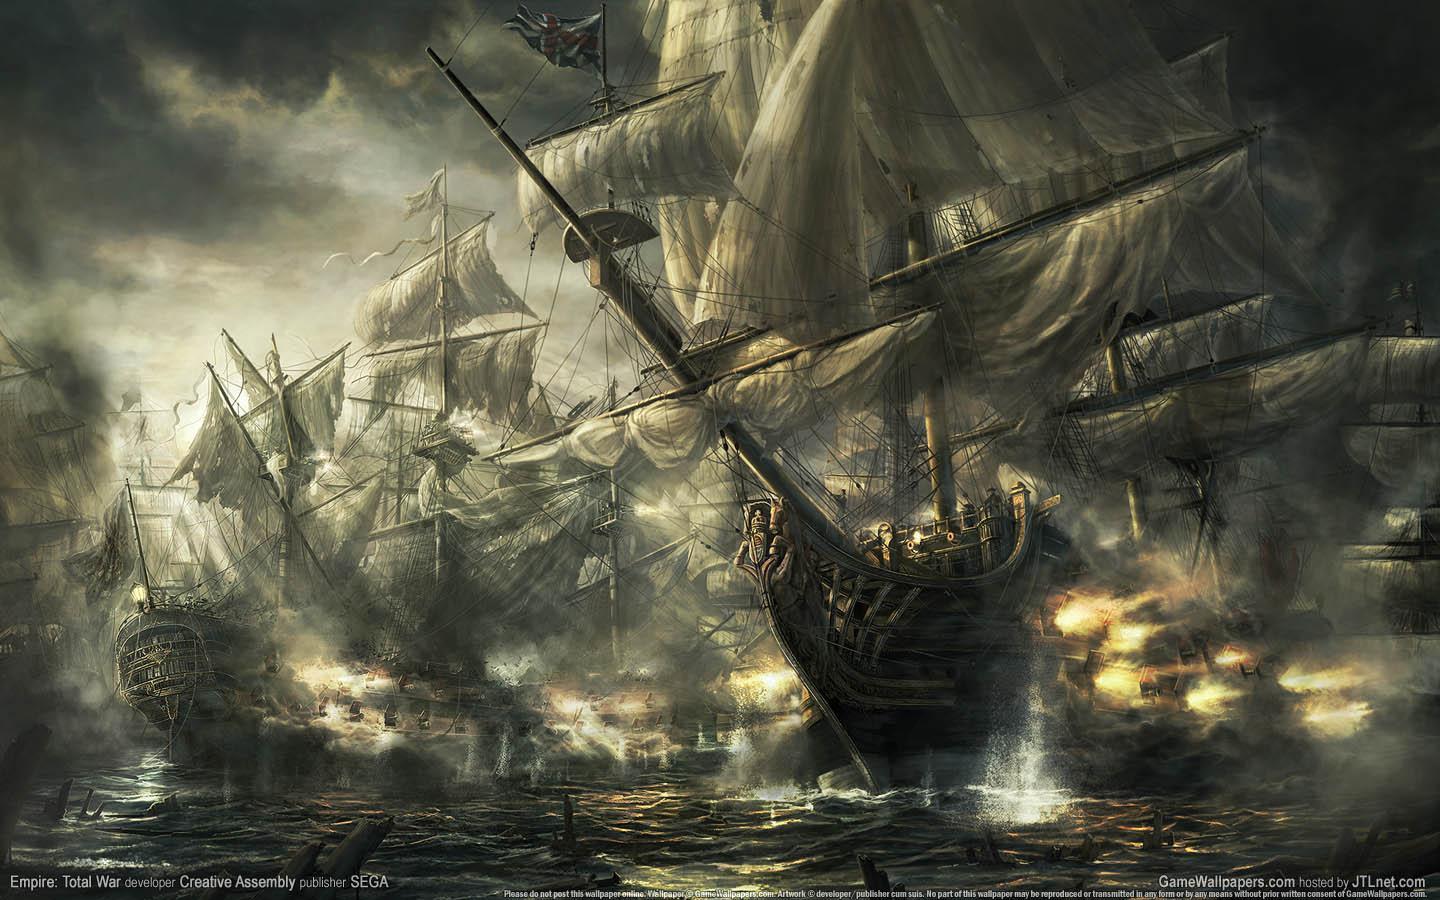 Gallery For gt Ghost Pirate Ship Wallpaper